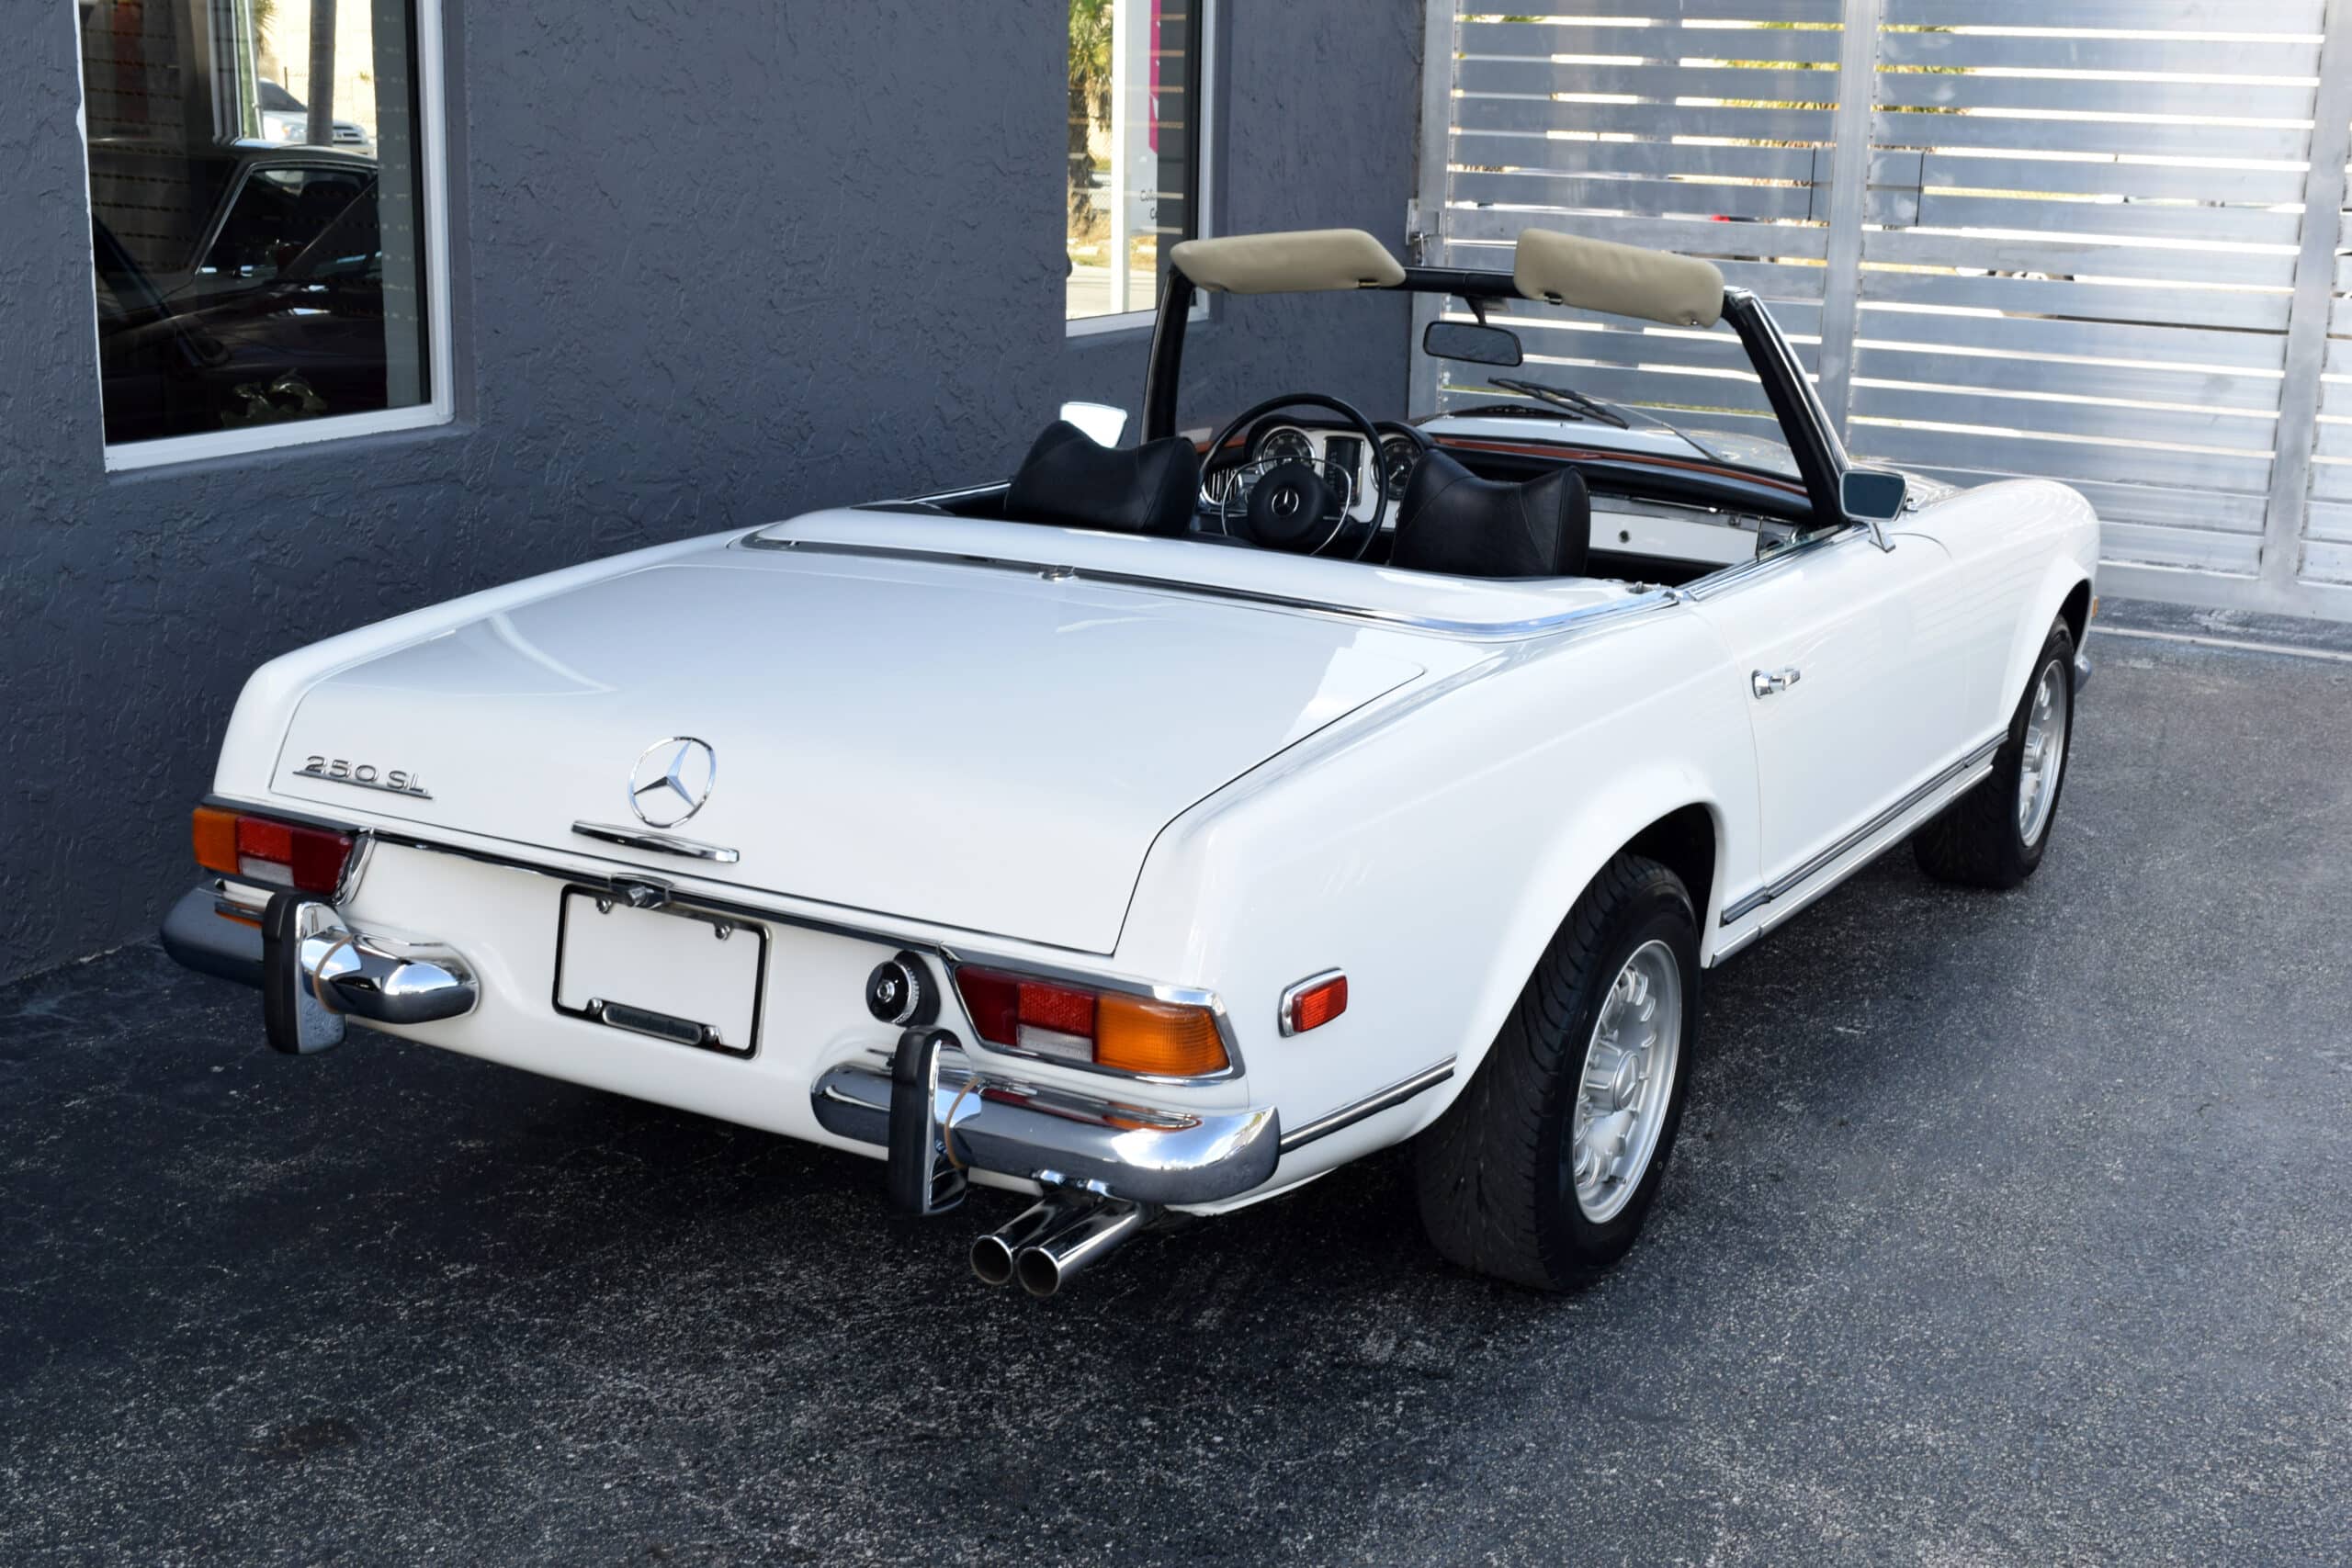 1968 Mercedes 250 SL “Pagoda”, 4-Speed manual, AC and Power Steering, unrestored in amazing time capsule condition